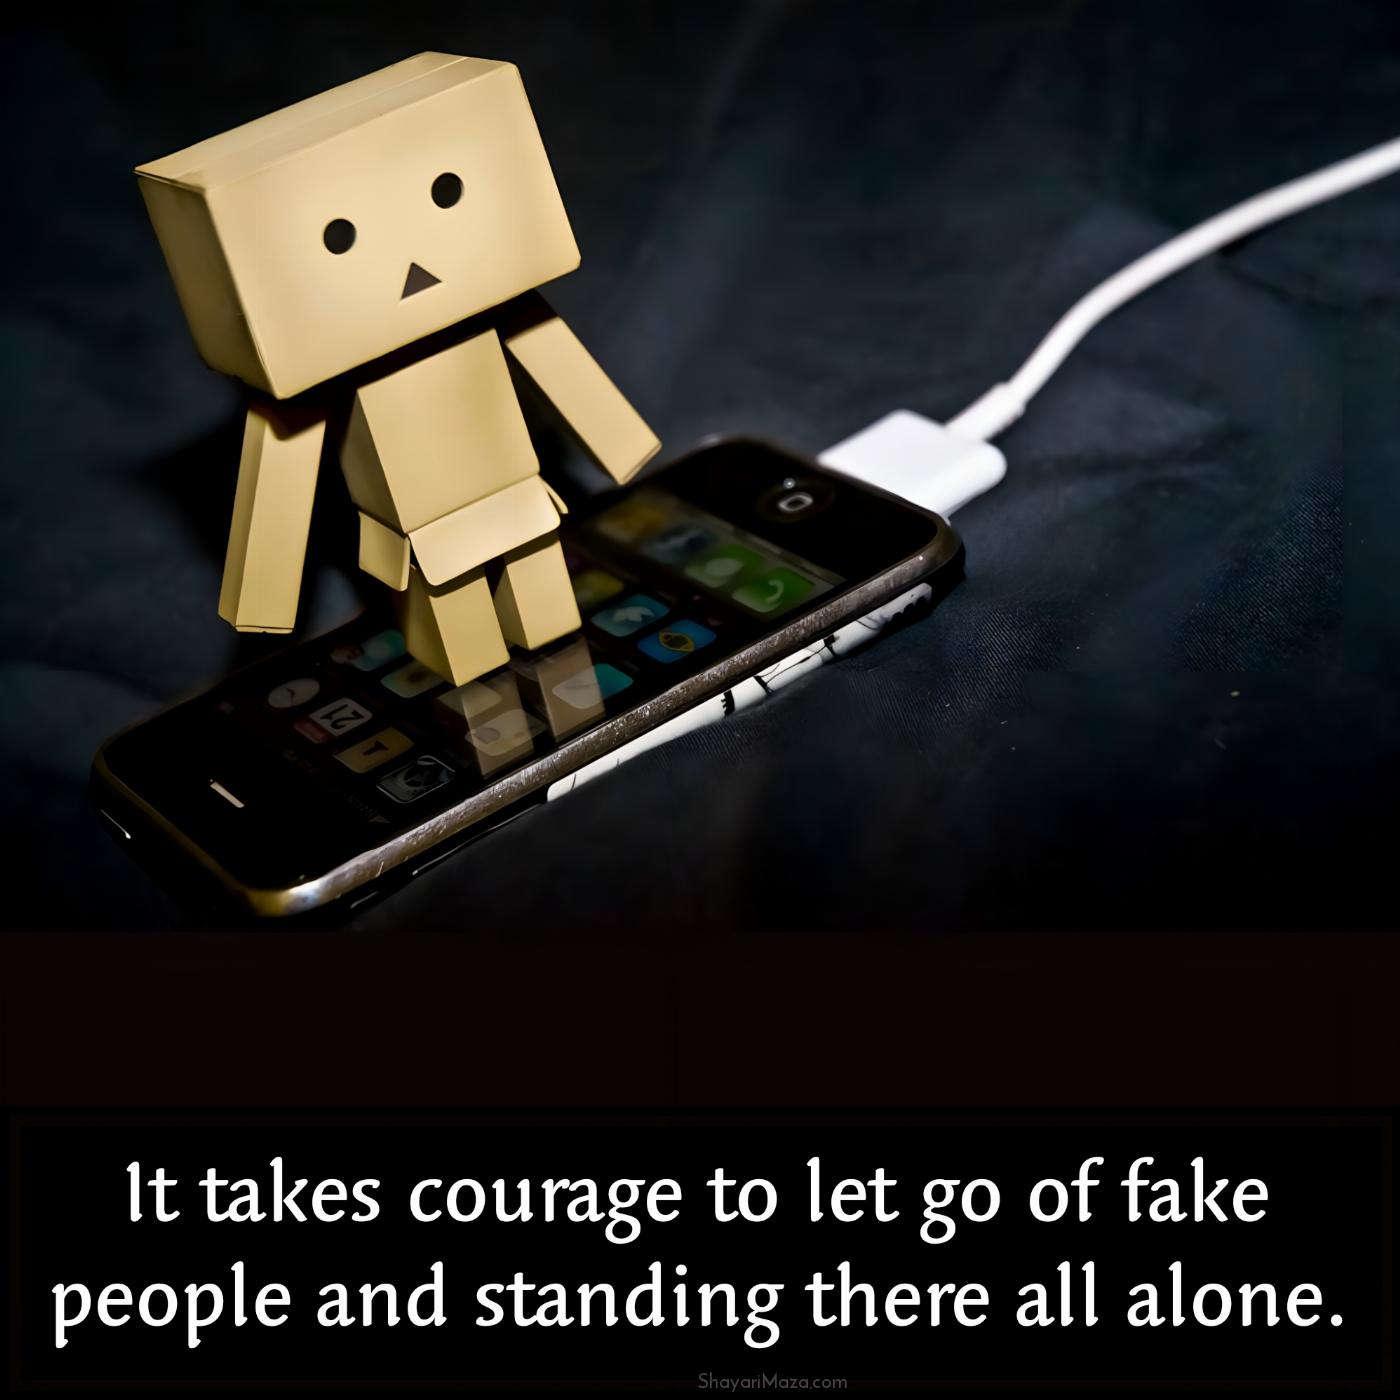 It takes courage to let go of fake people and standing there